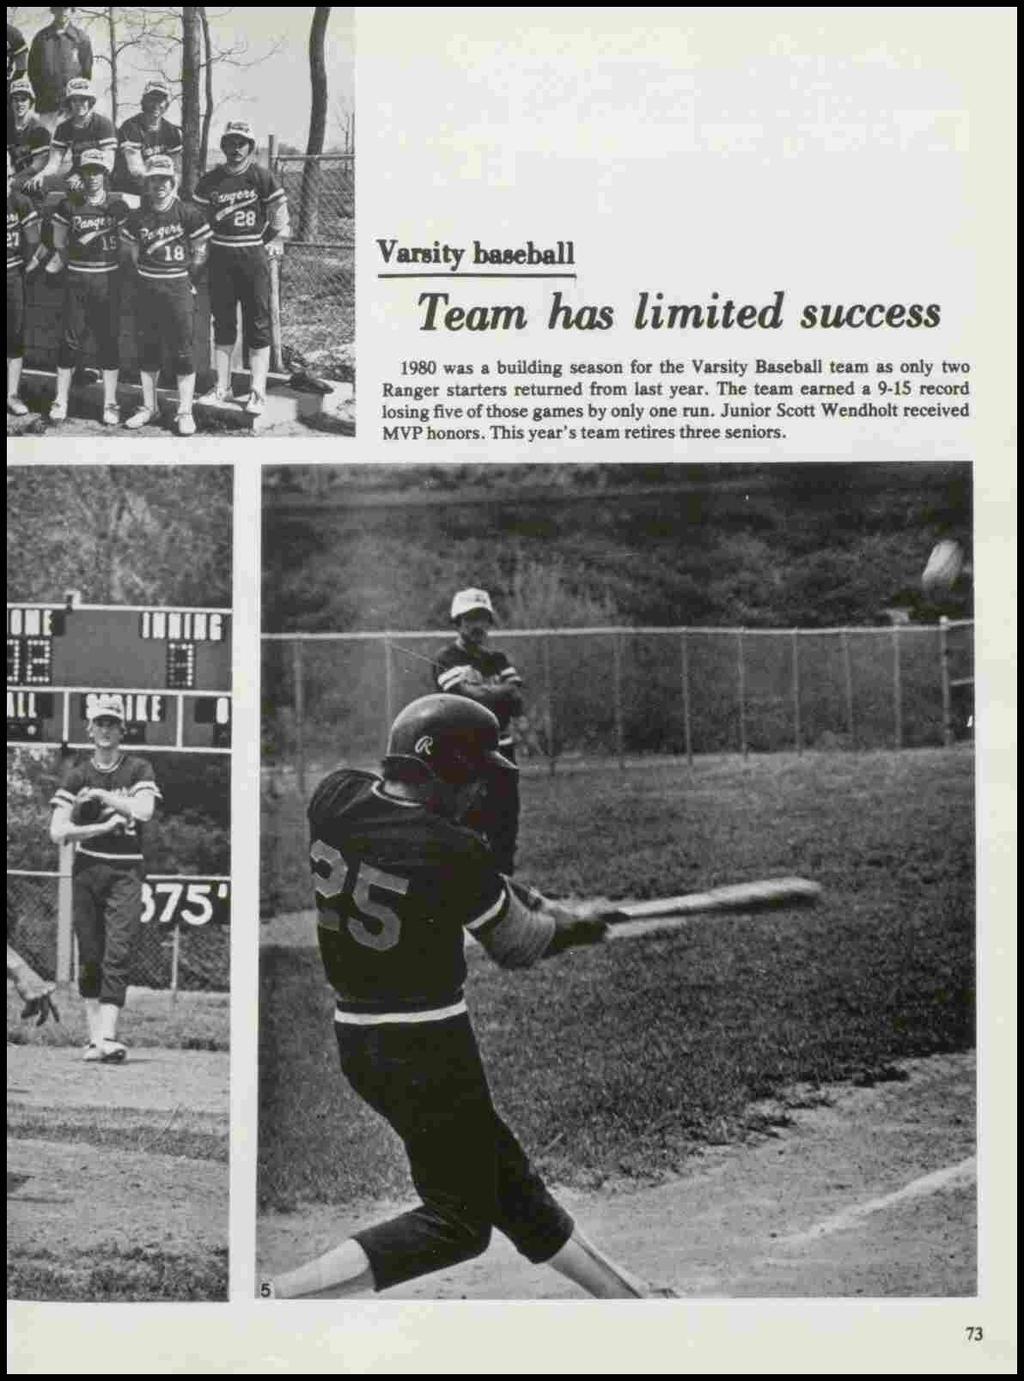 Vanity bueball Team has limited success 1980 was a building season for the Varsity Baseball team as only two Ranger starters returned from last year.